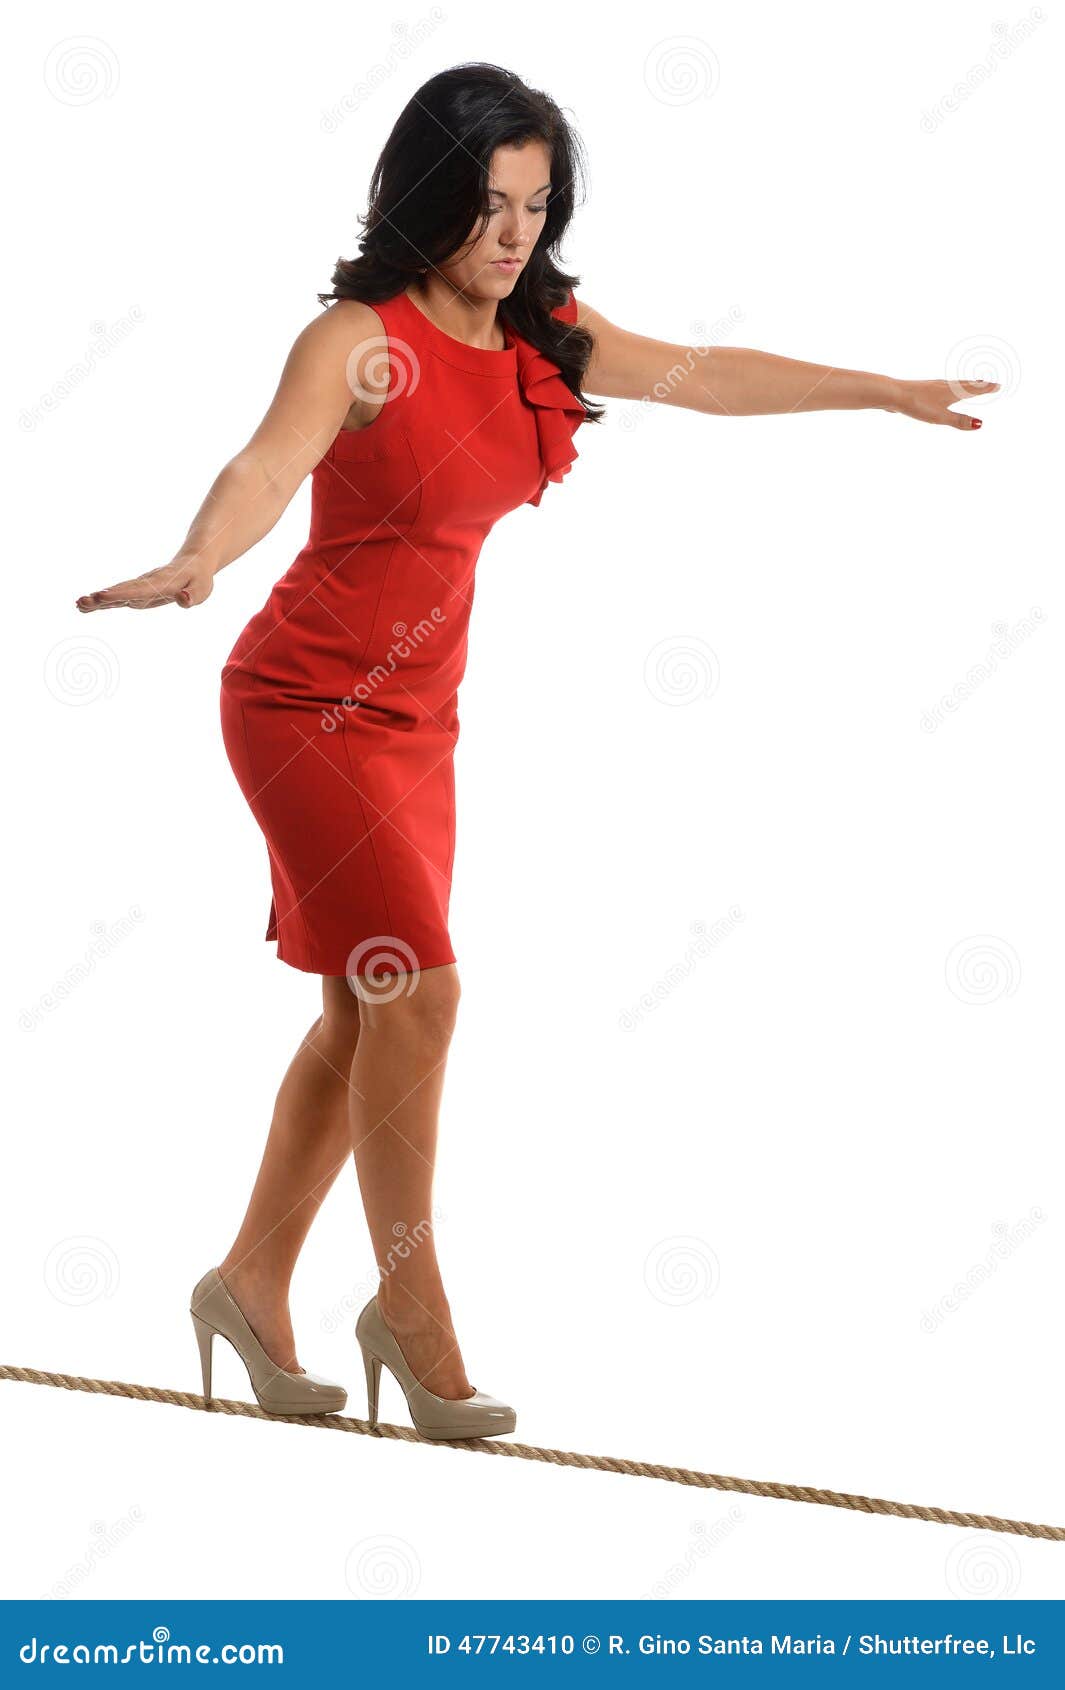 https://thumbs.dreamstime.com/z/businesswoman-walking-tightrope-young-isolated-over-white-background-47743410.jpg